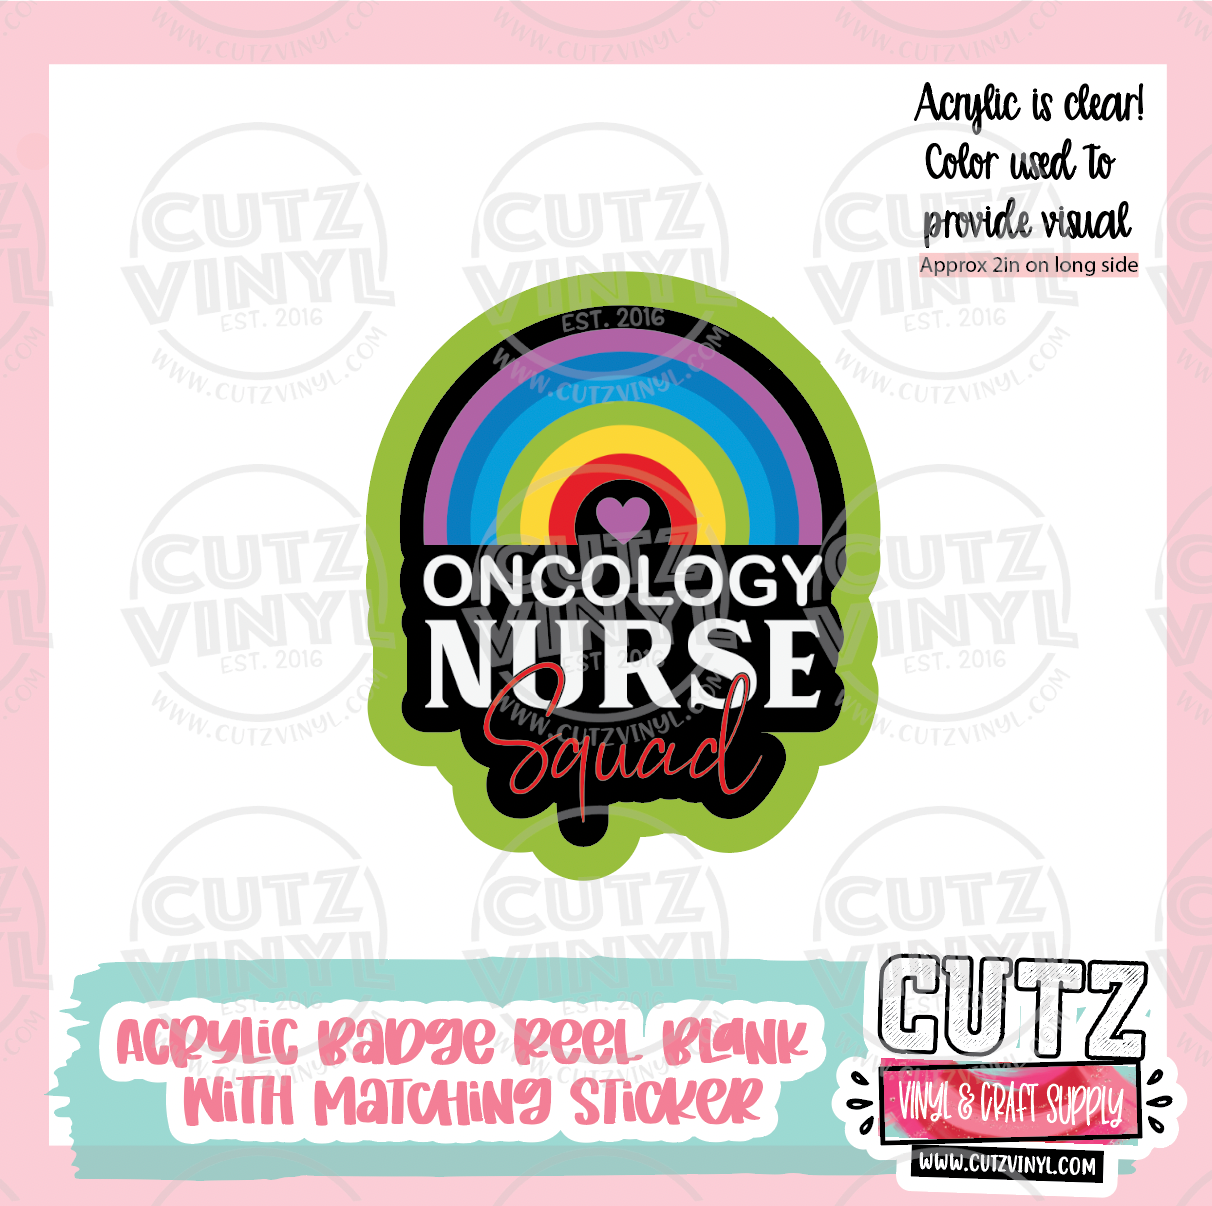 Oncology Nurse - Acrylic Badge Reel Blank and Matching Sticker